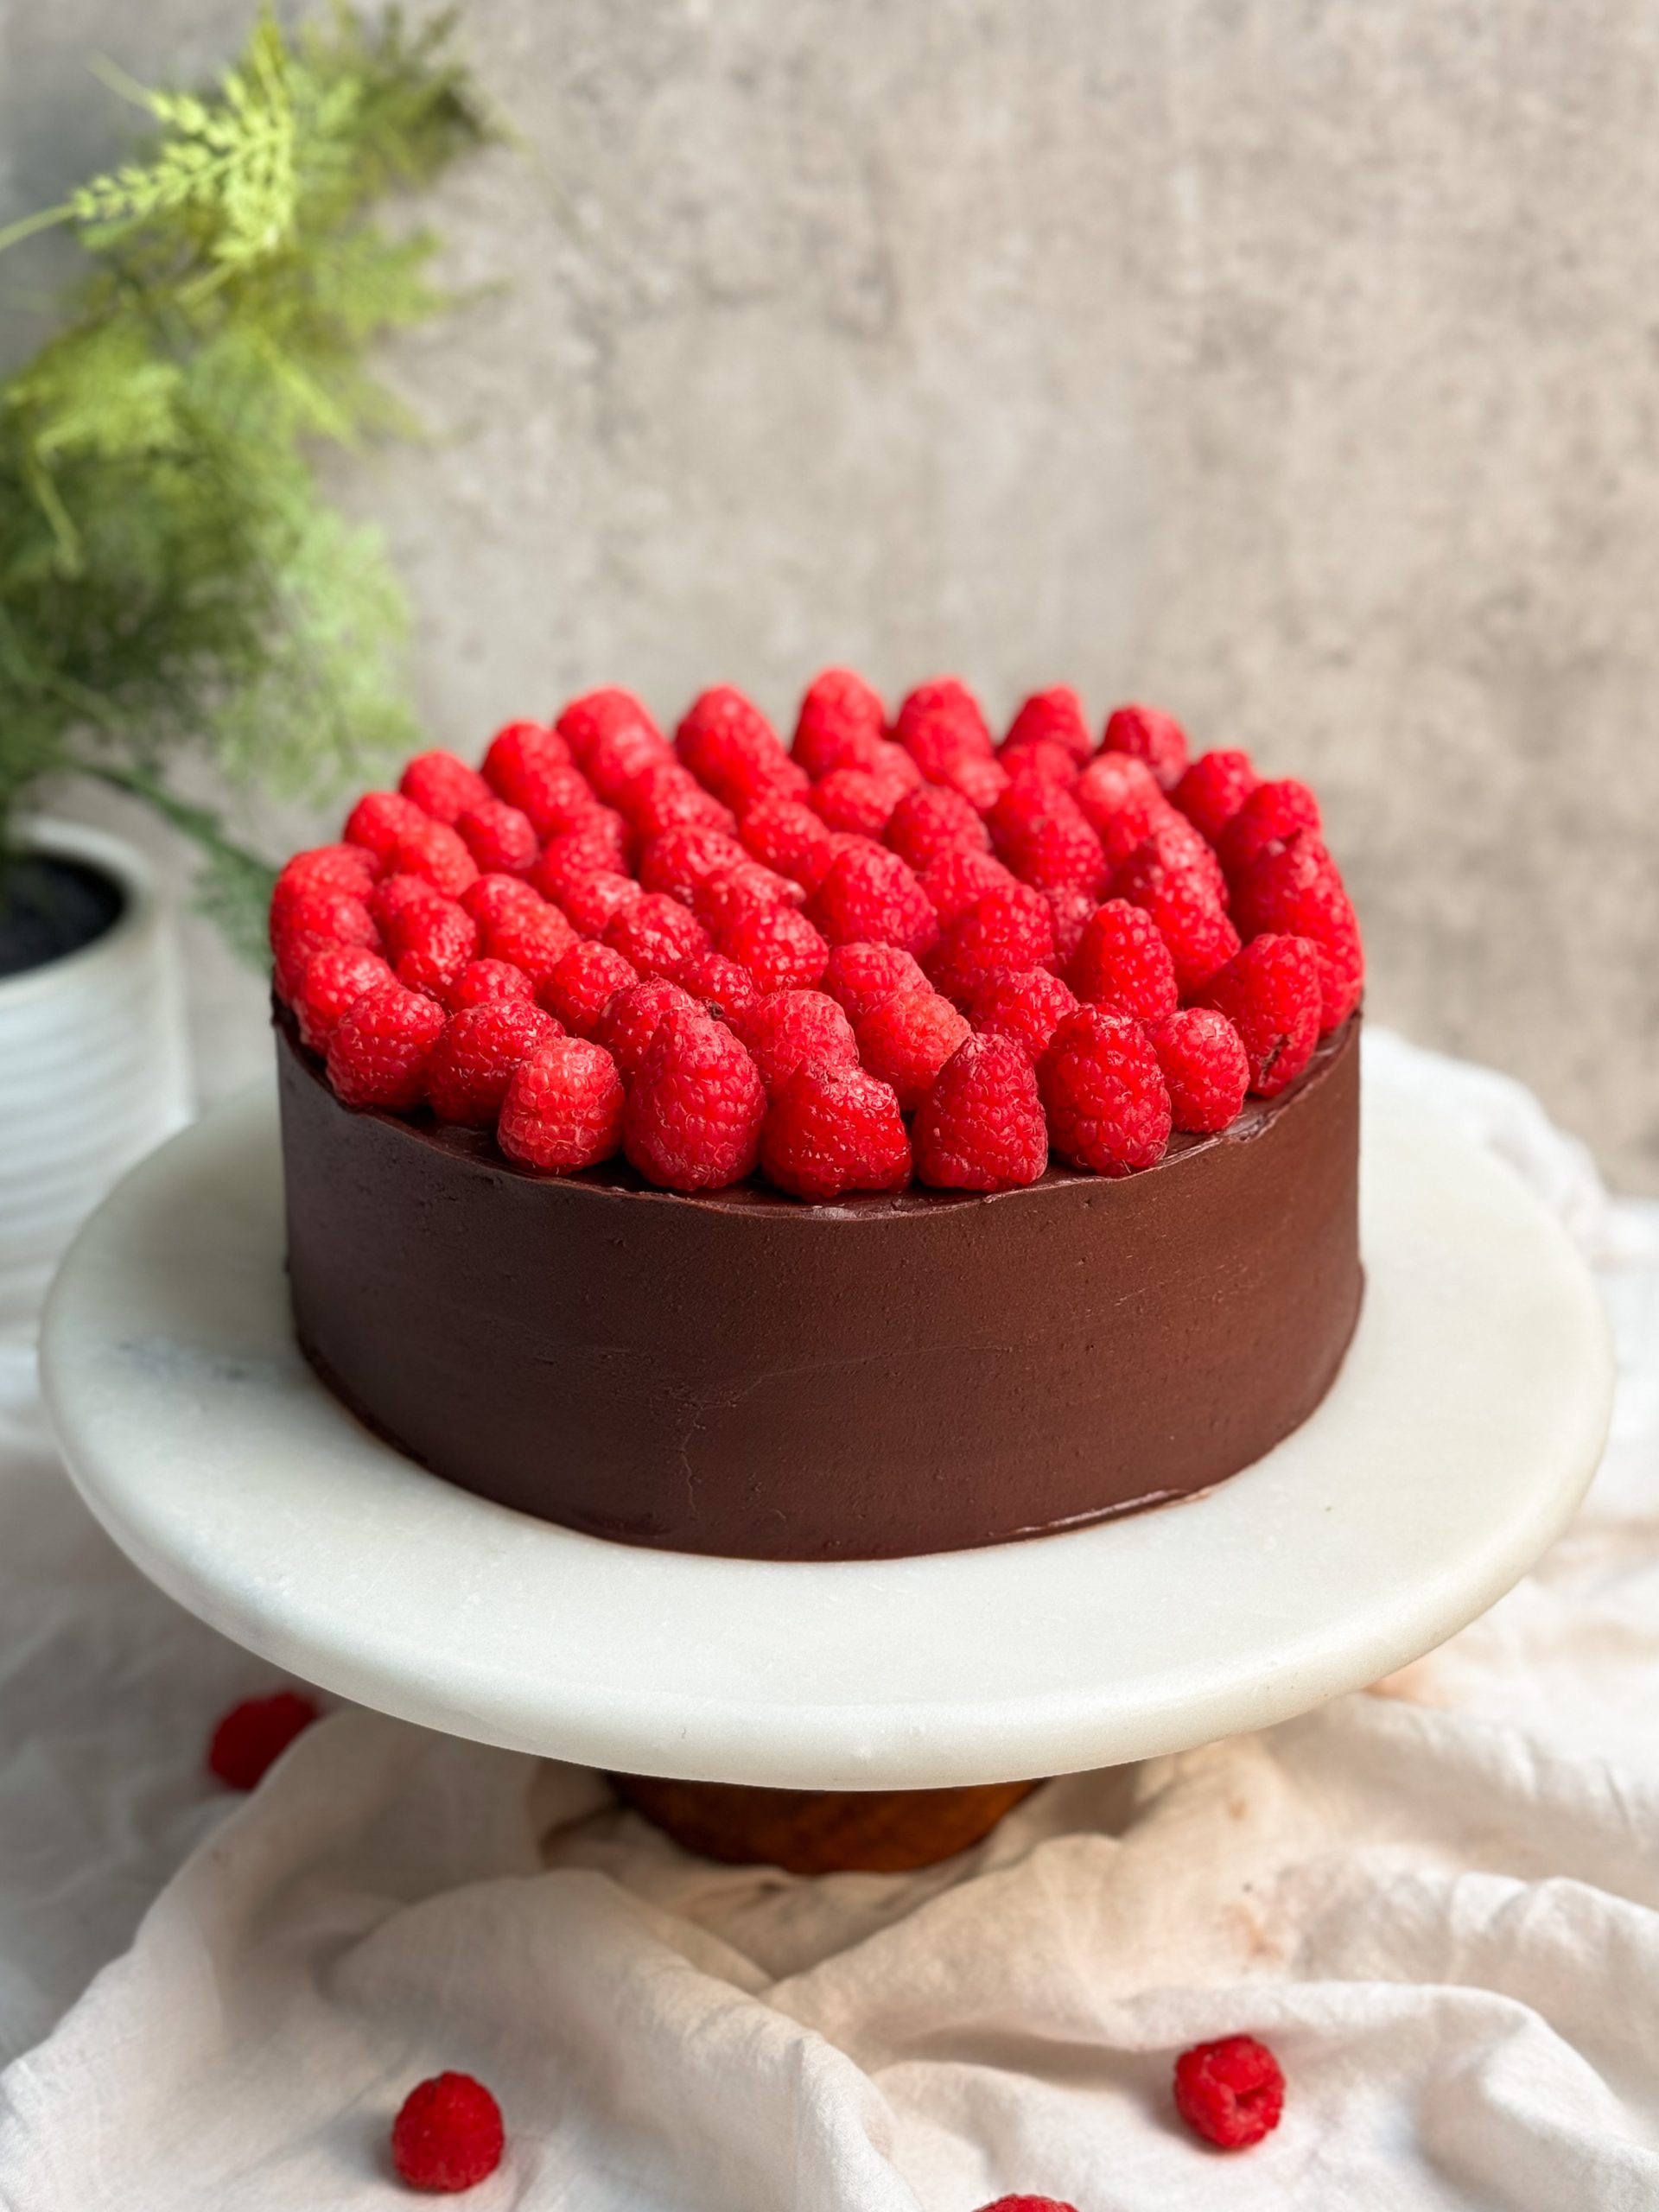 A chocolate cake covered in ganache and decorated with fresh raspberries on a white serving board